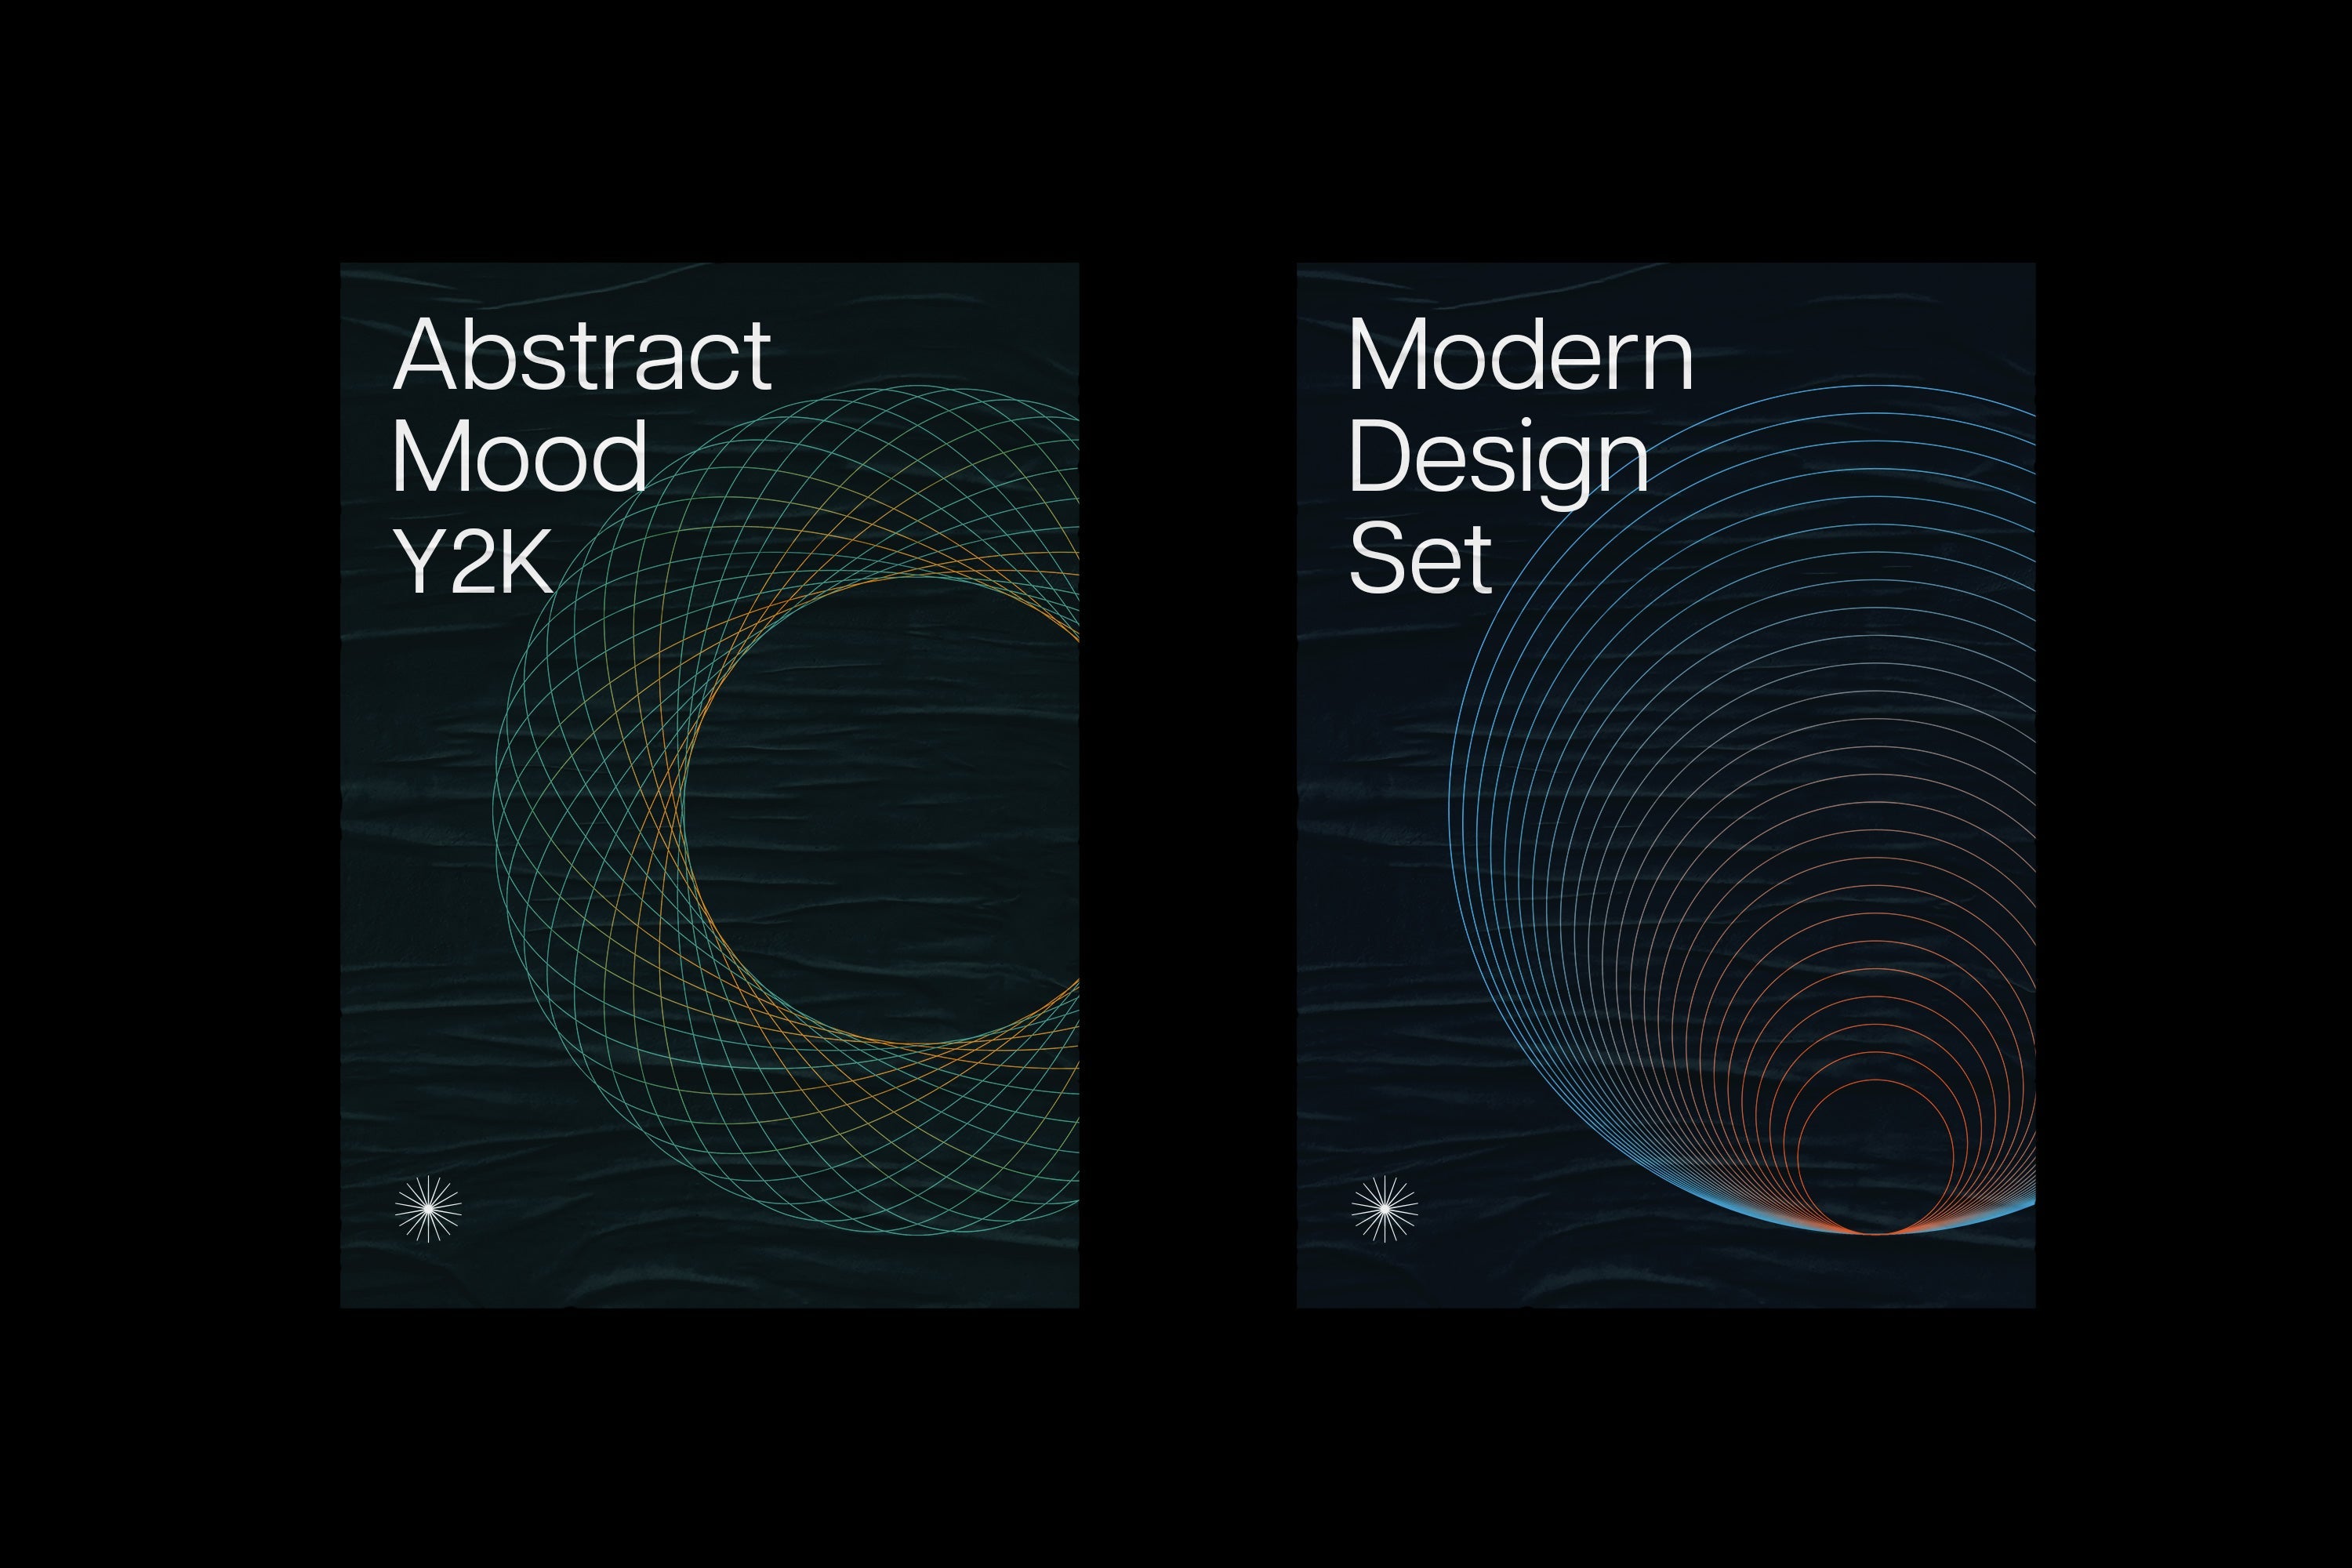 Abstract Twirls Elements Pack